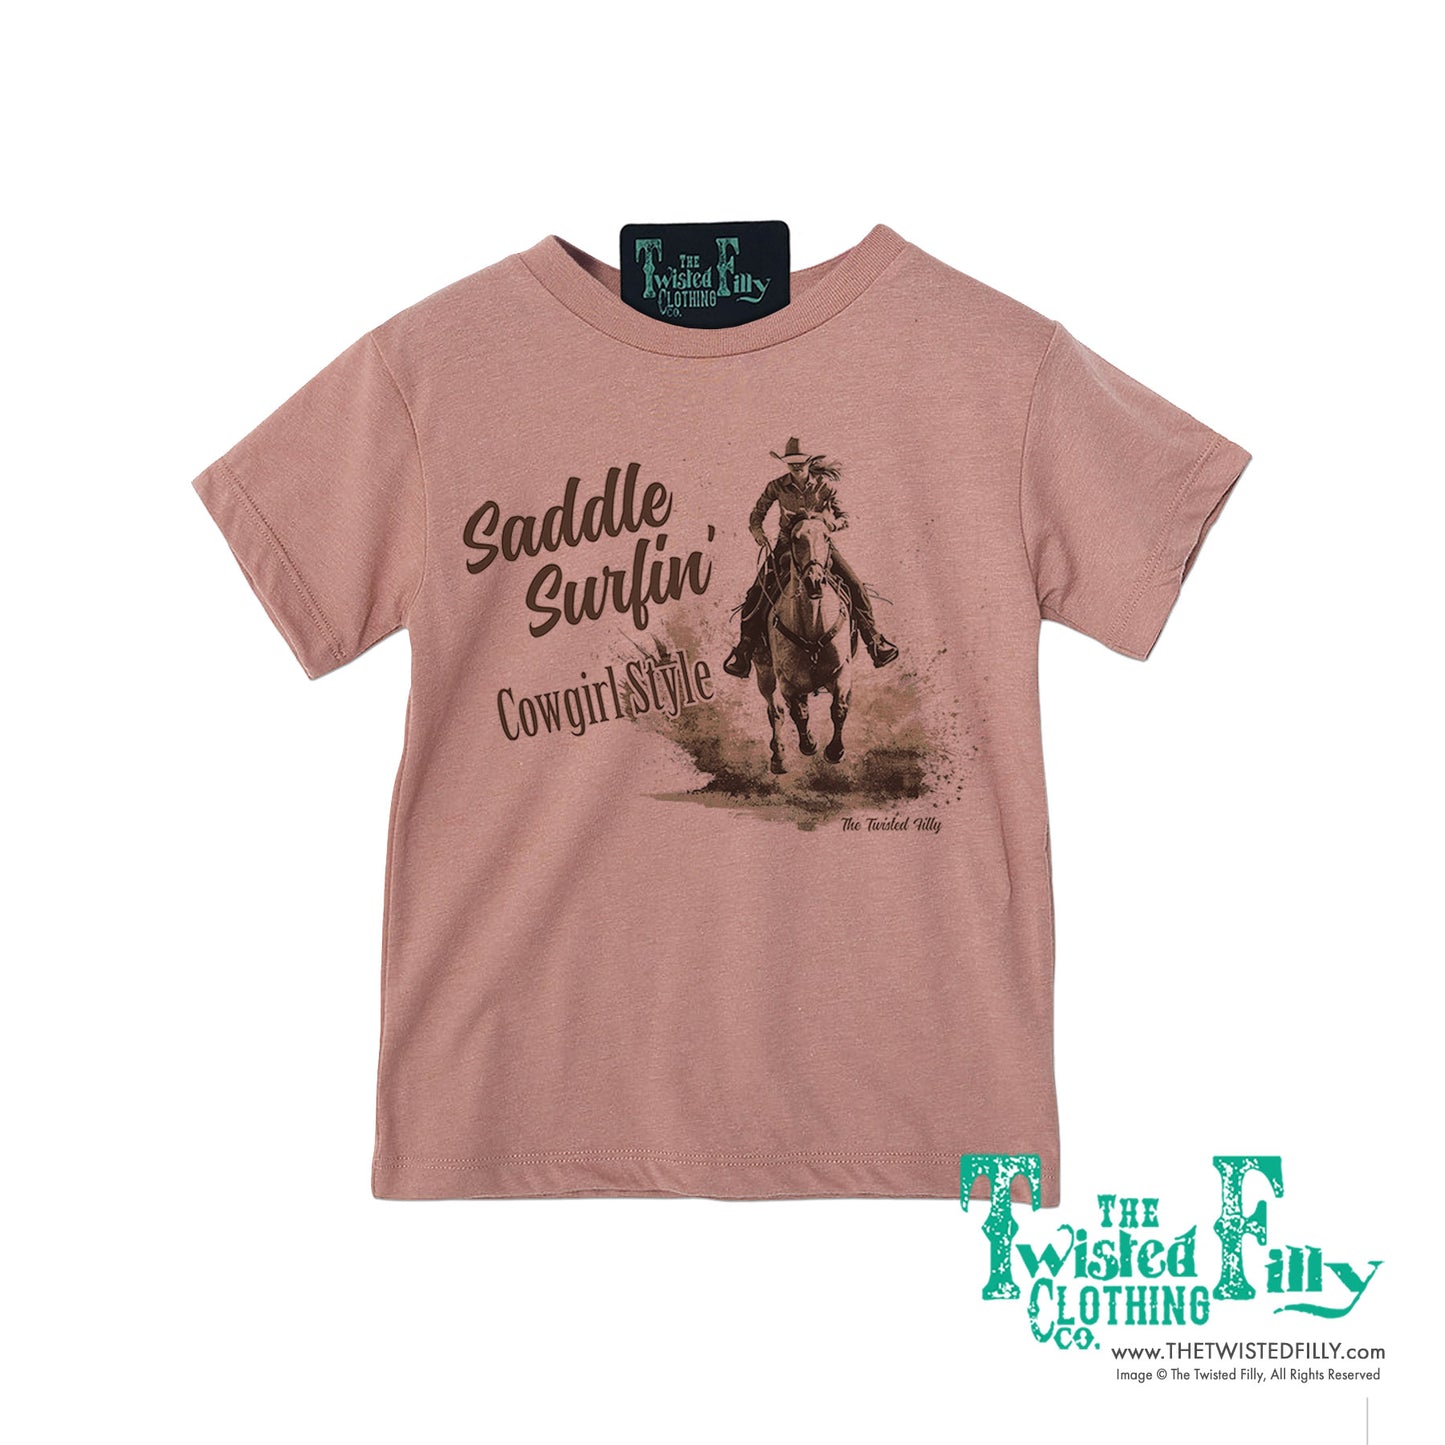 Saddle Surfin' Cowgirl Style - S/S Girls Youth Tee - Assorted Colors